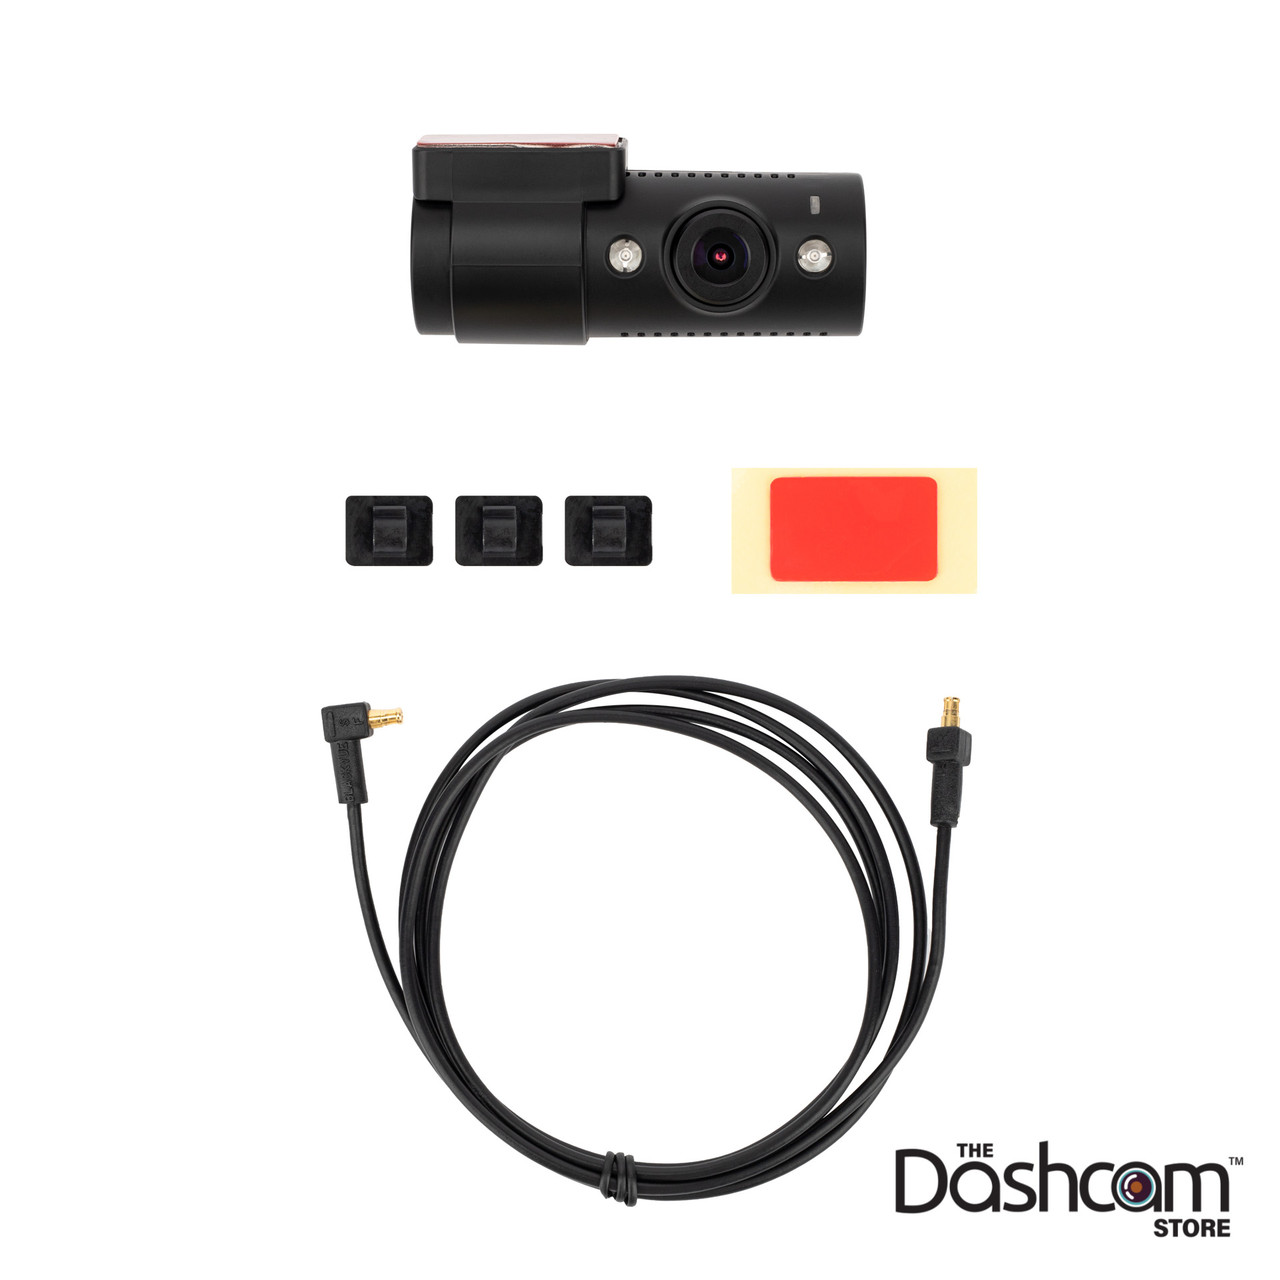 https://cdn11.bigcommerce.com/s-za60ms/images/stencil/1280x1280/products/738/8519/thedashcamstore.com-blackvue-rc110f-ir-c-interior-infrared-camera-upgrade-kit-for-dr750x-plus-1920px-9__07950.1680040675.jpg?c=2